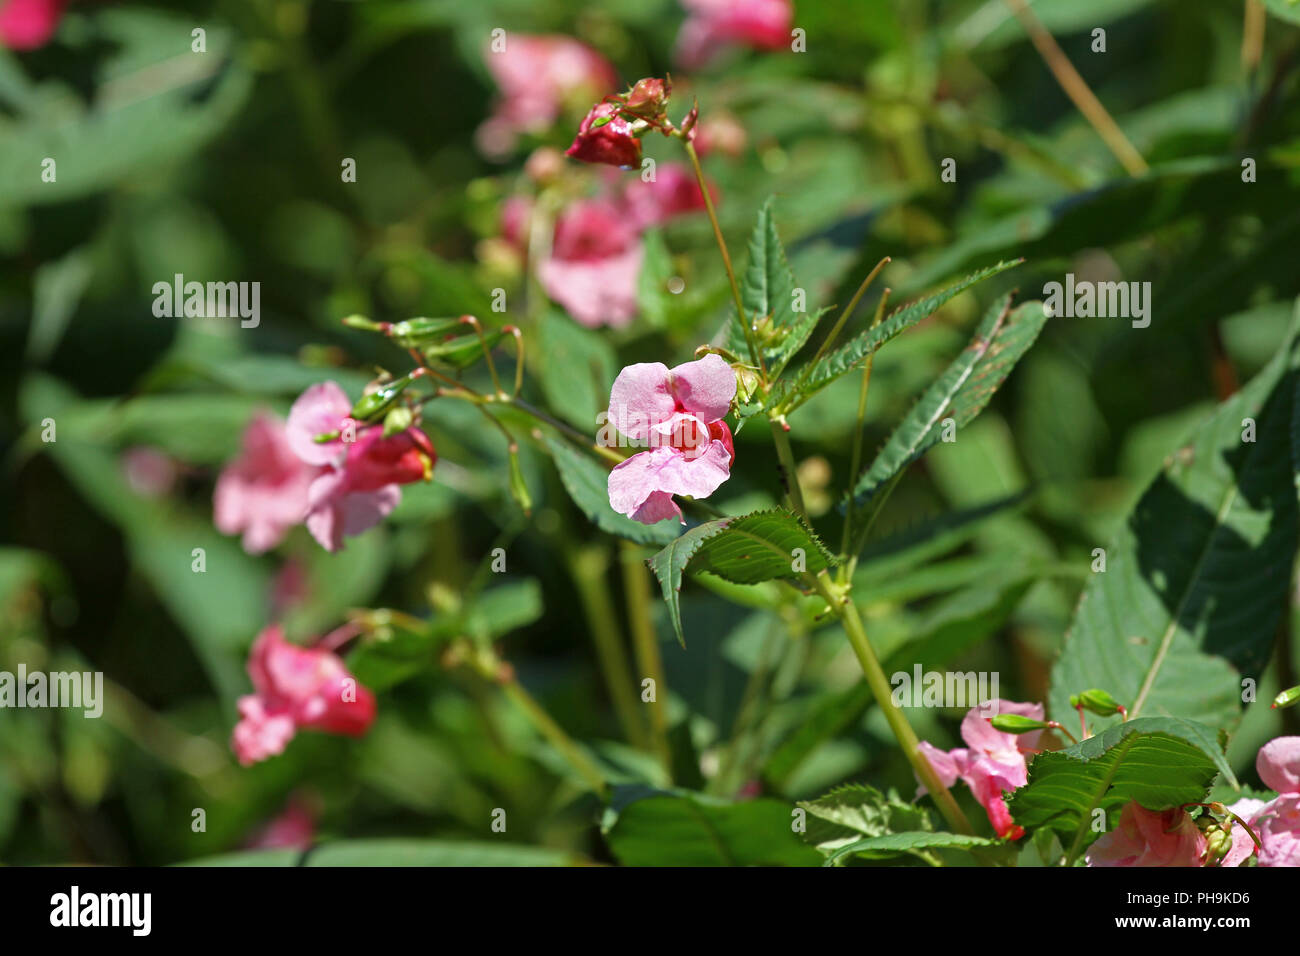 Impatiens glandulifera, Jewelweed, Himalayan balsam in the garden. Impatiens glandulifera flower bush outdoor in nature. Floral pattern. Flowers backg Stock Photo